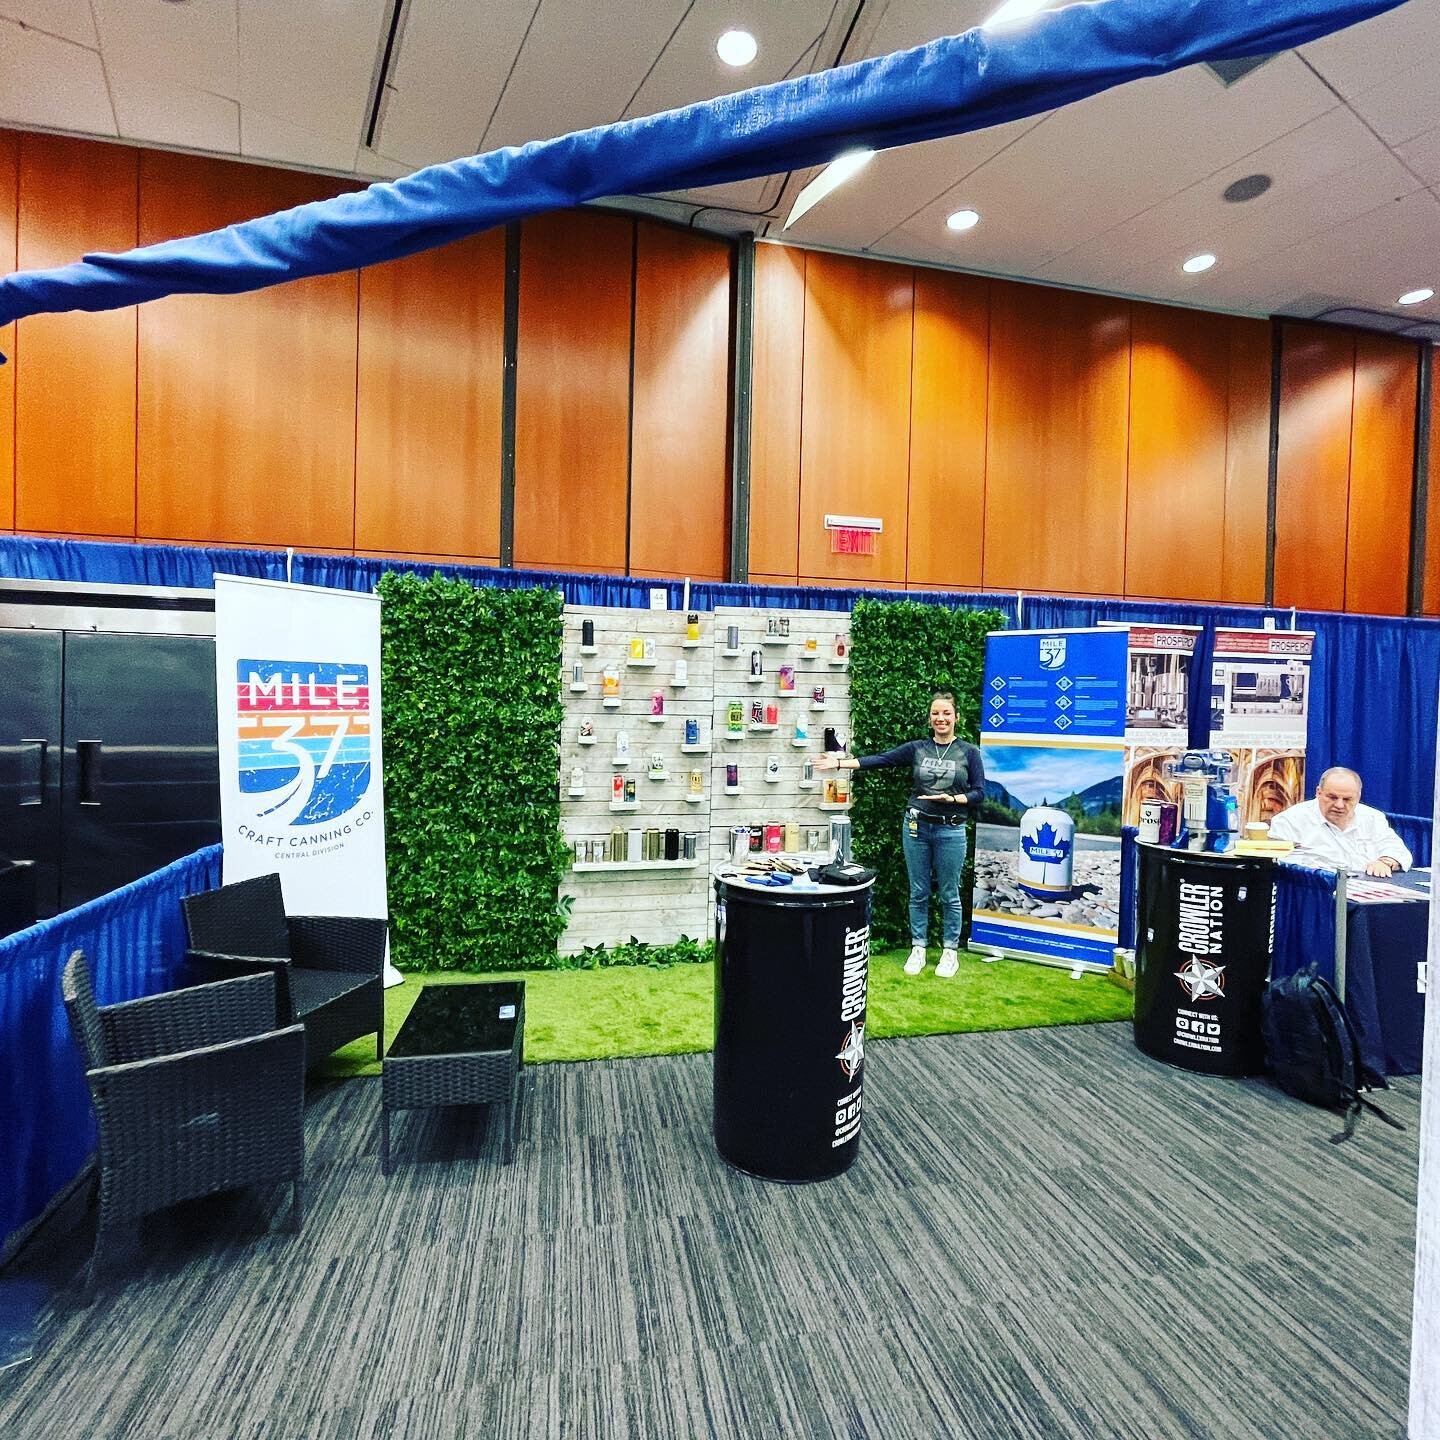 Hey folks! The grass has never been greener at the Mile 37 booth. We&rsquo;re set up right next to the bar at the BC Craft Brewers Conference, so come on by for a beverage and say hello!🍻✋ &hellip;Camera one. Camera two.